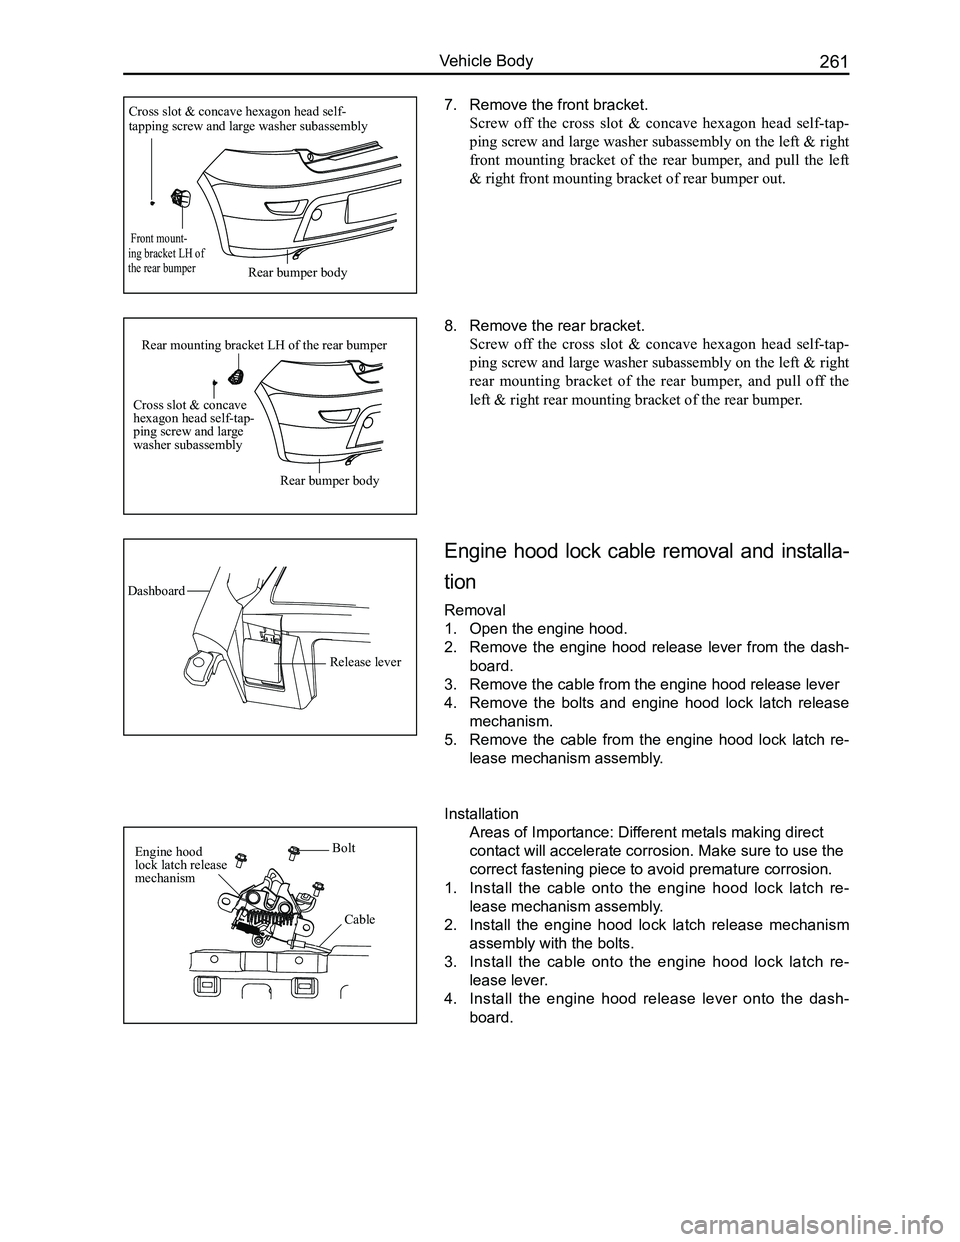 GREAT WALL FLORID 2008  Service Manual Downloaded from www.Manualslib.com manuals search engine 261Vehicle Body
7. Remove the front bracket.
Screw  off  the  cross  slot  &  concave  hexagon  head  self-tap-
ping screw and large washer sub